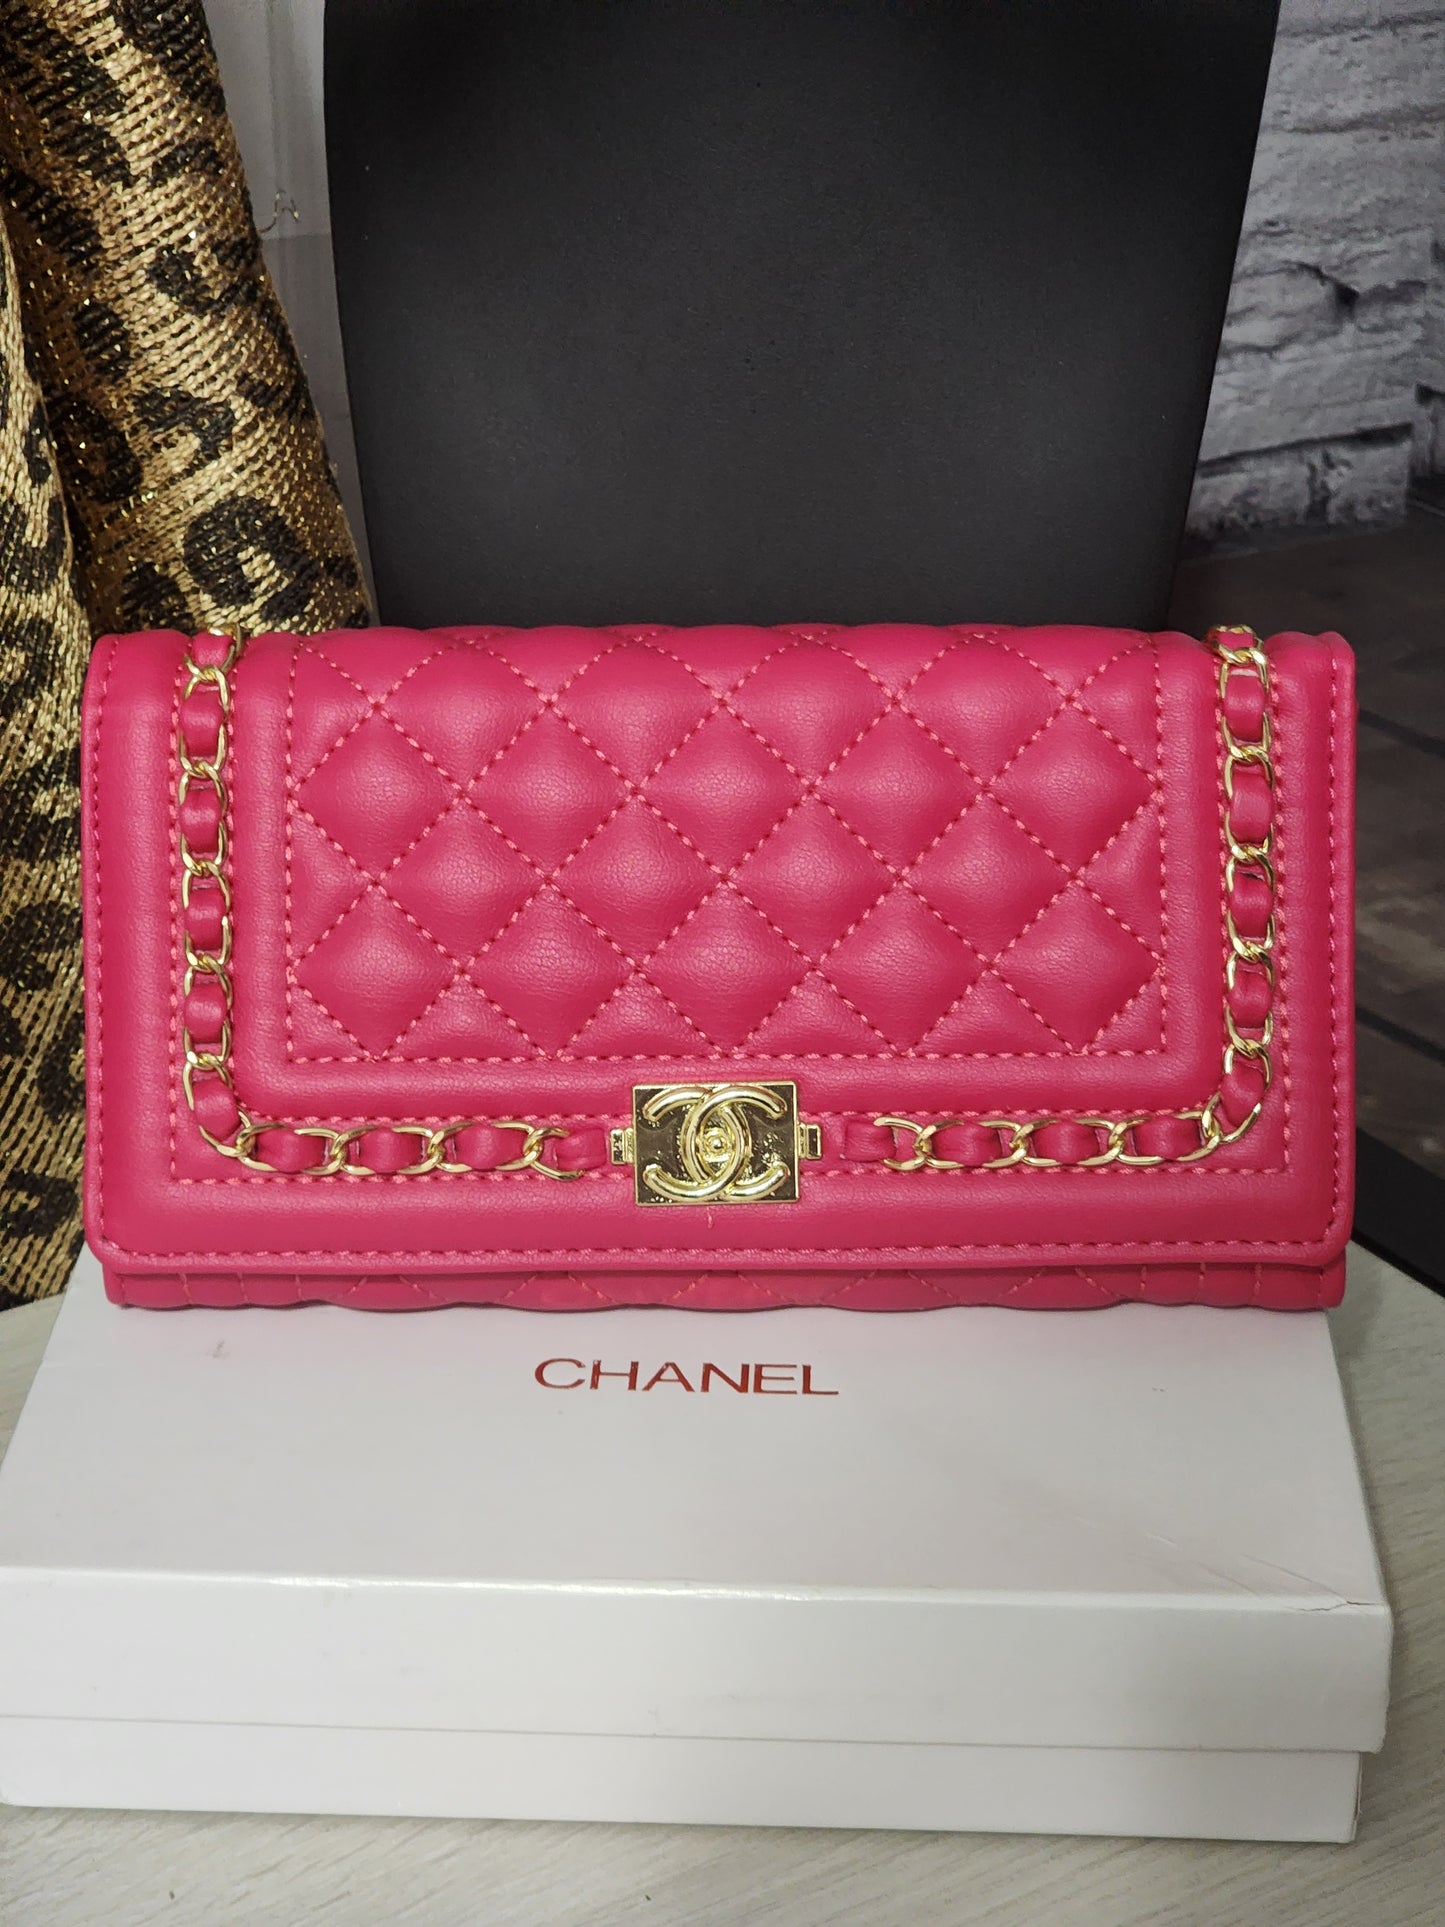 Inspired Black or Pink Clutches/Crossbody